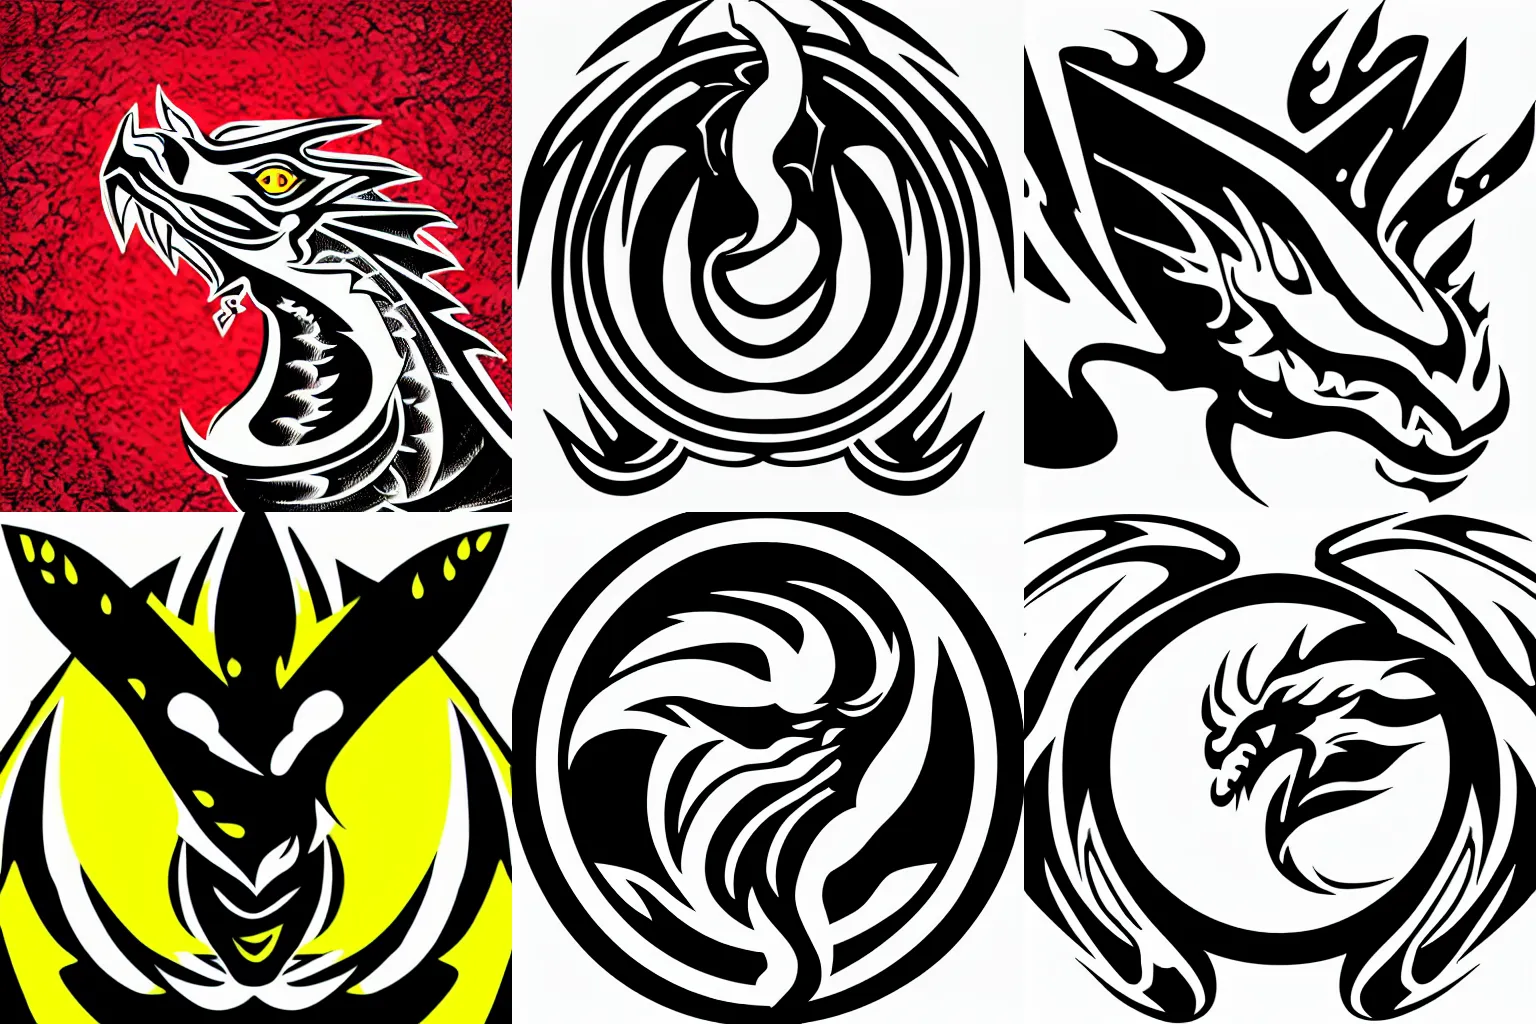 Prompt: dragon head close up looking at you breathing fire, logo vector art rectanglular format, black and white